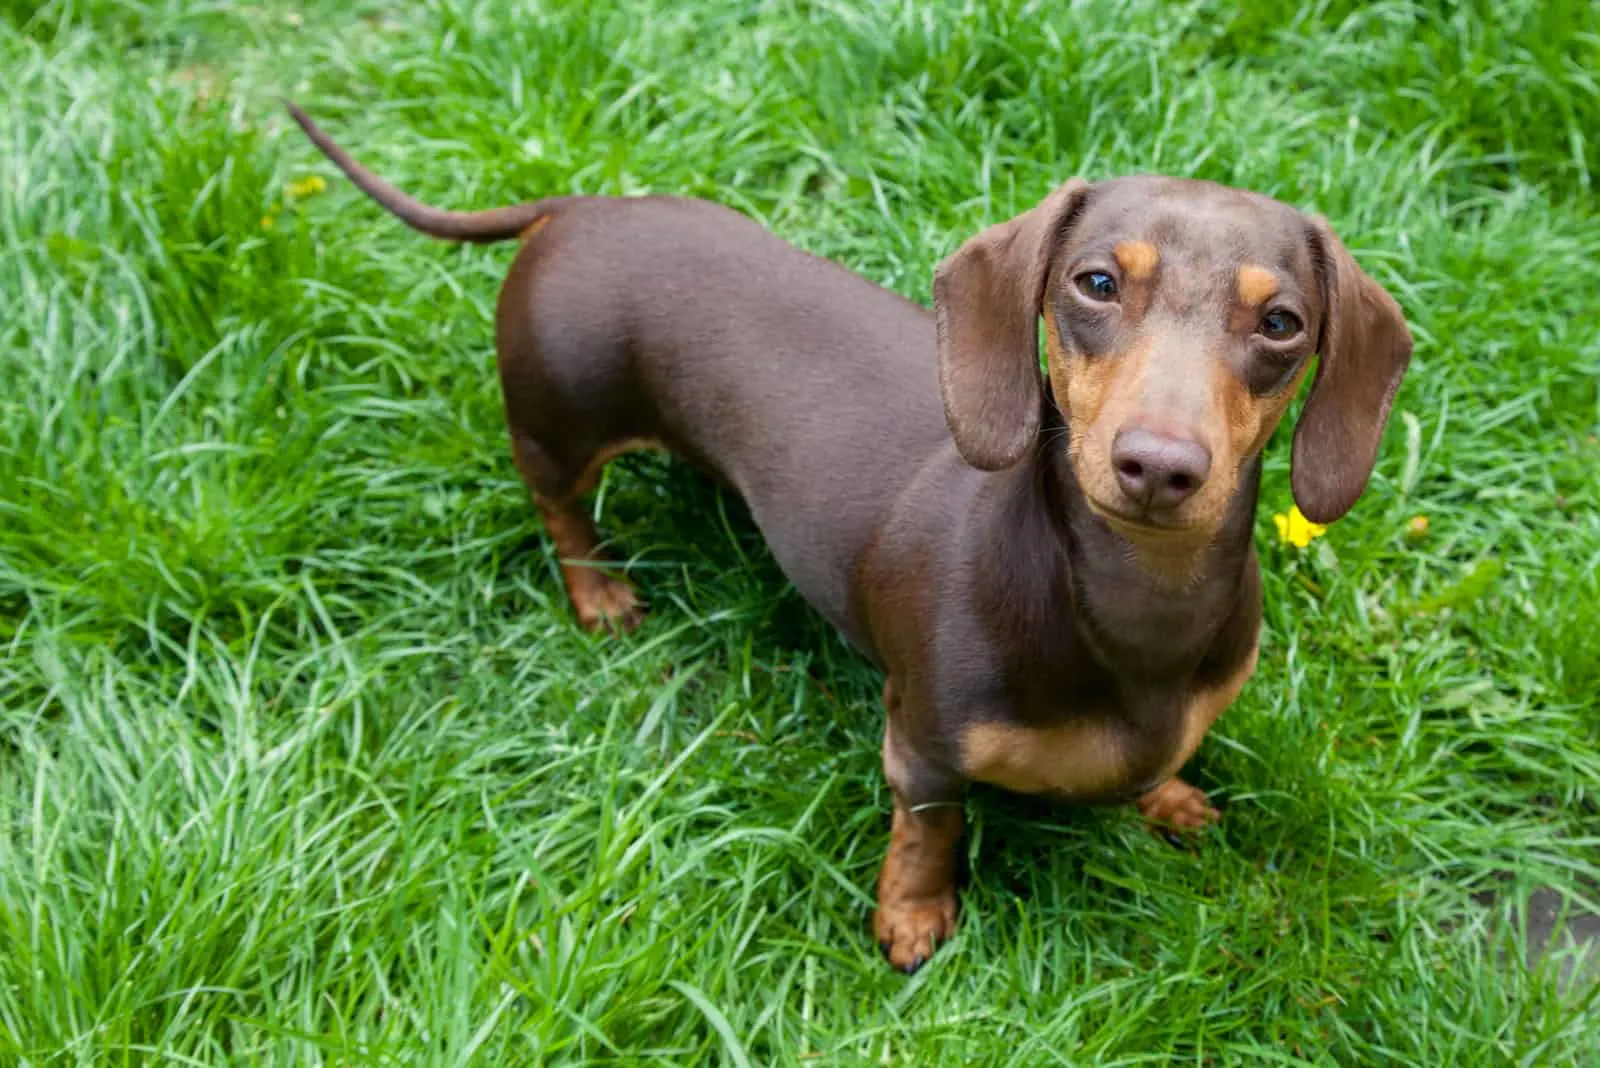 Dachshund is standing in the grass and looking at the camera